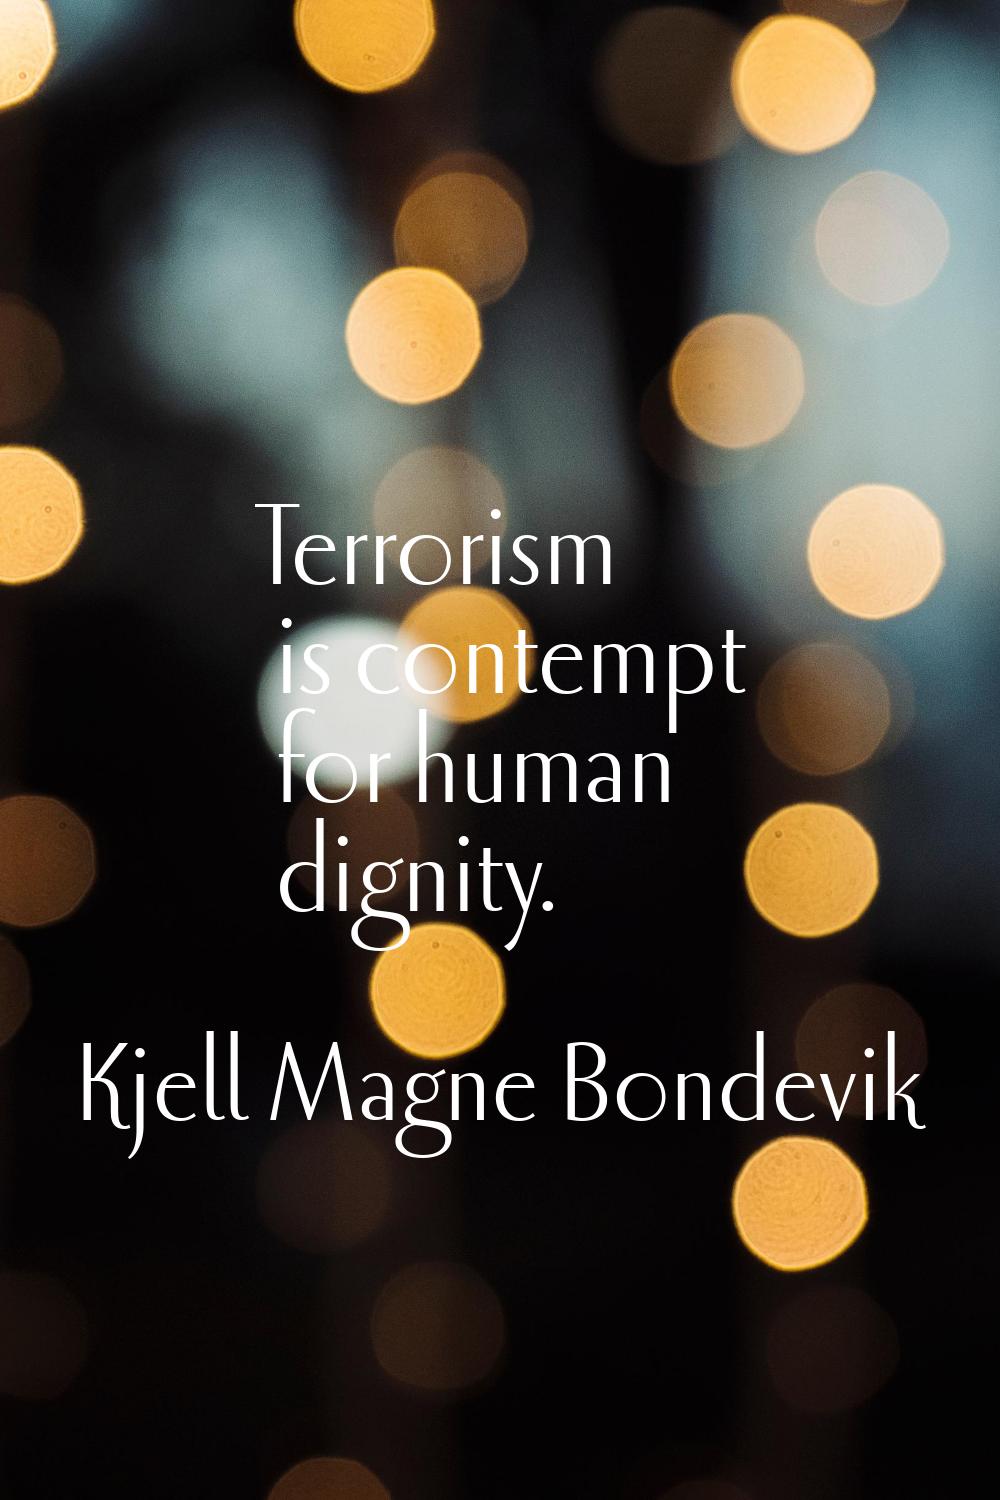 Terrorism is contempt for human dignity.